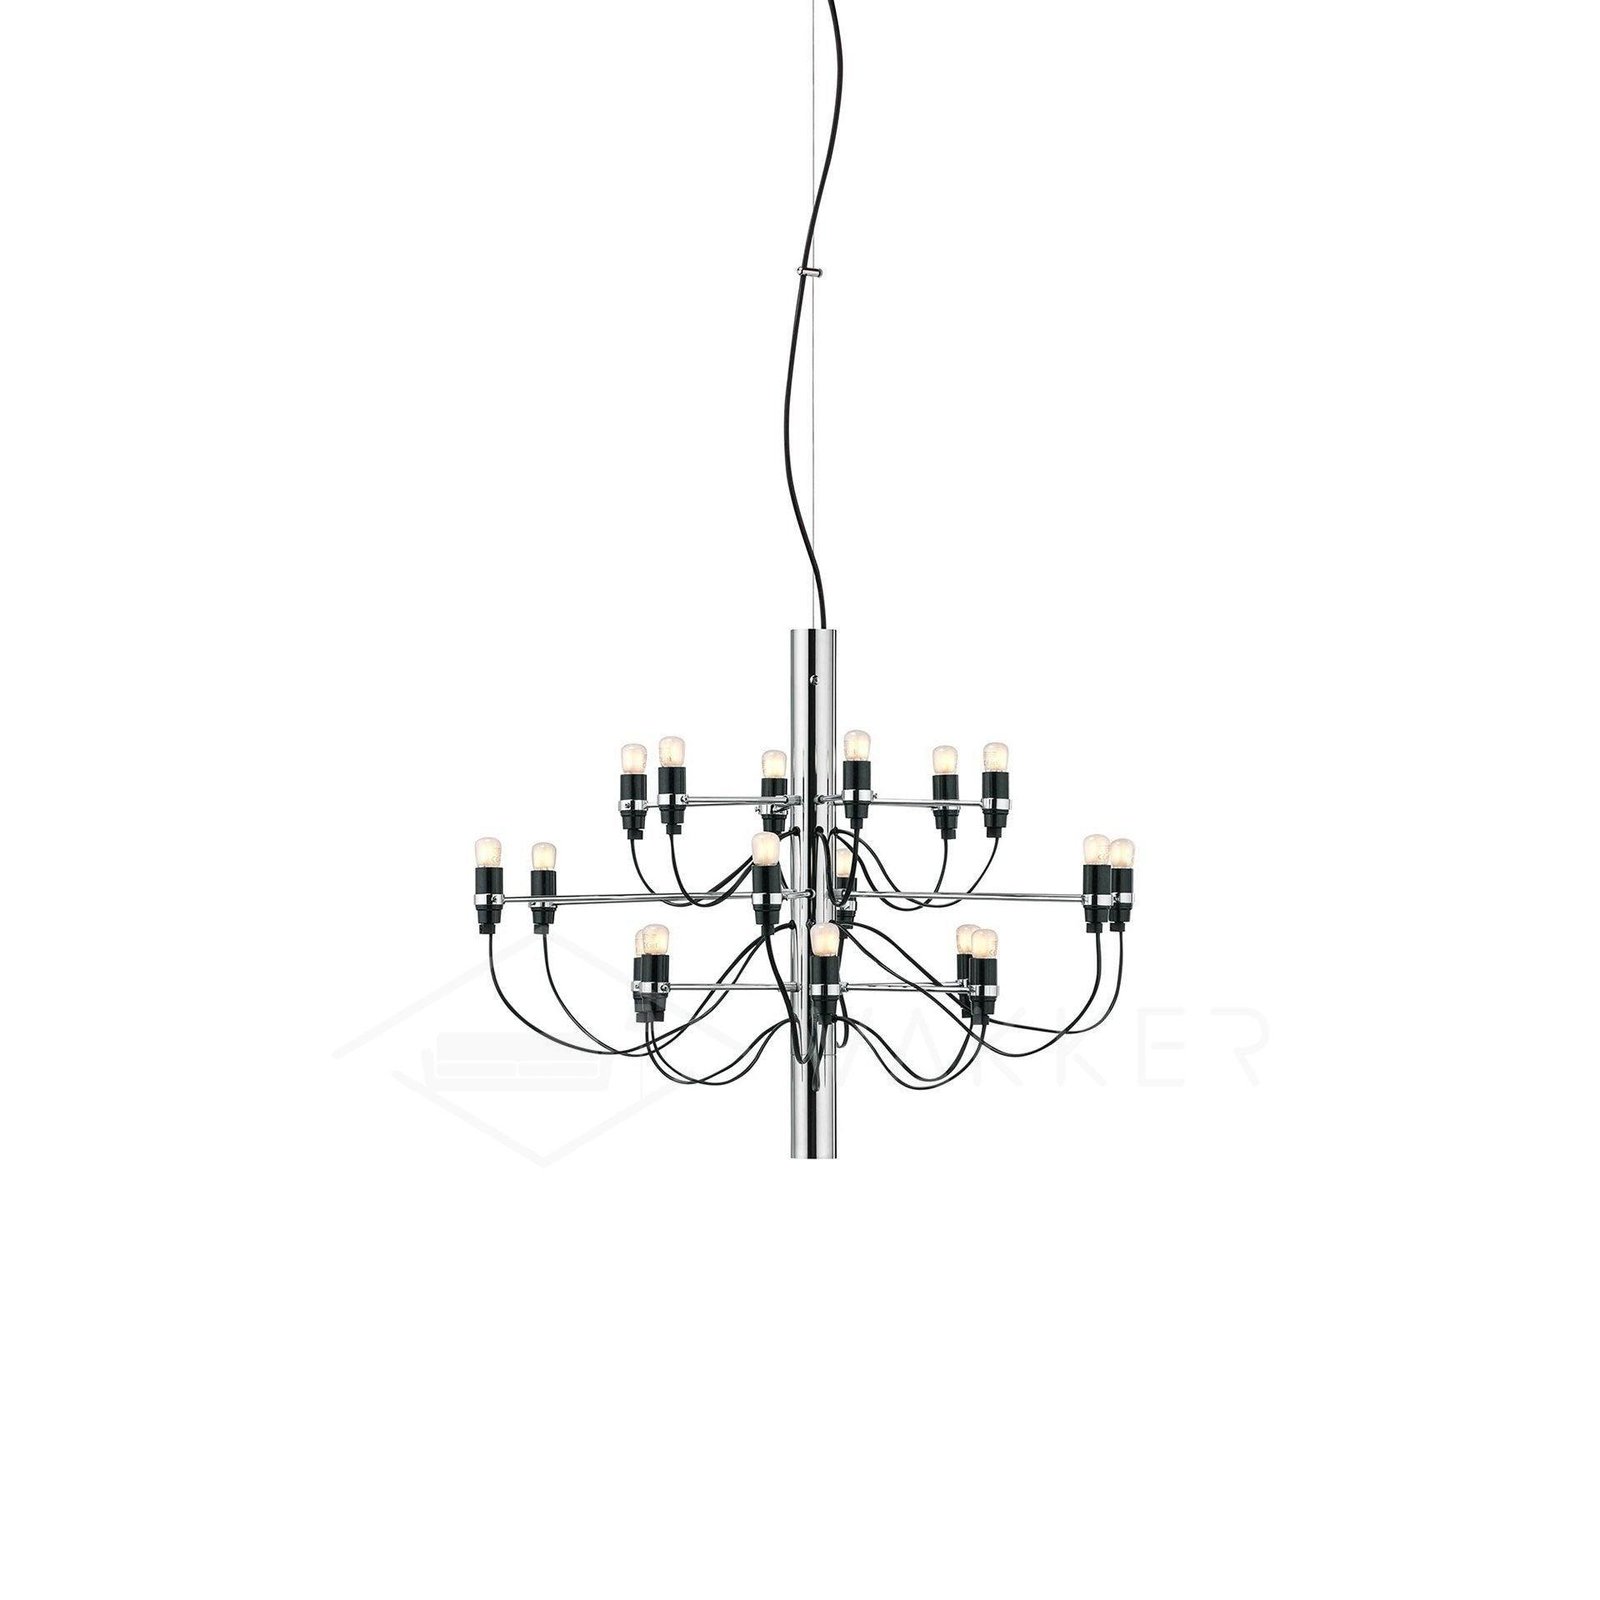 18-headed Suspension Lamp - 2097 Style: Diameter 21.7 inches x Height 15.7 inches, or 55cm x 40cm, in Chrome